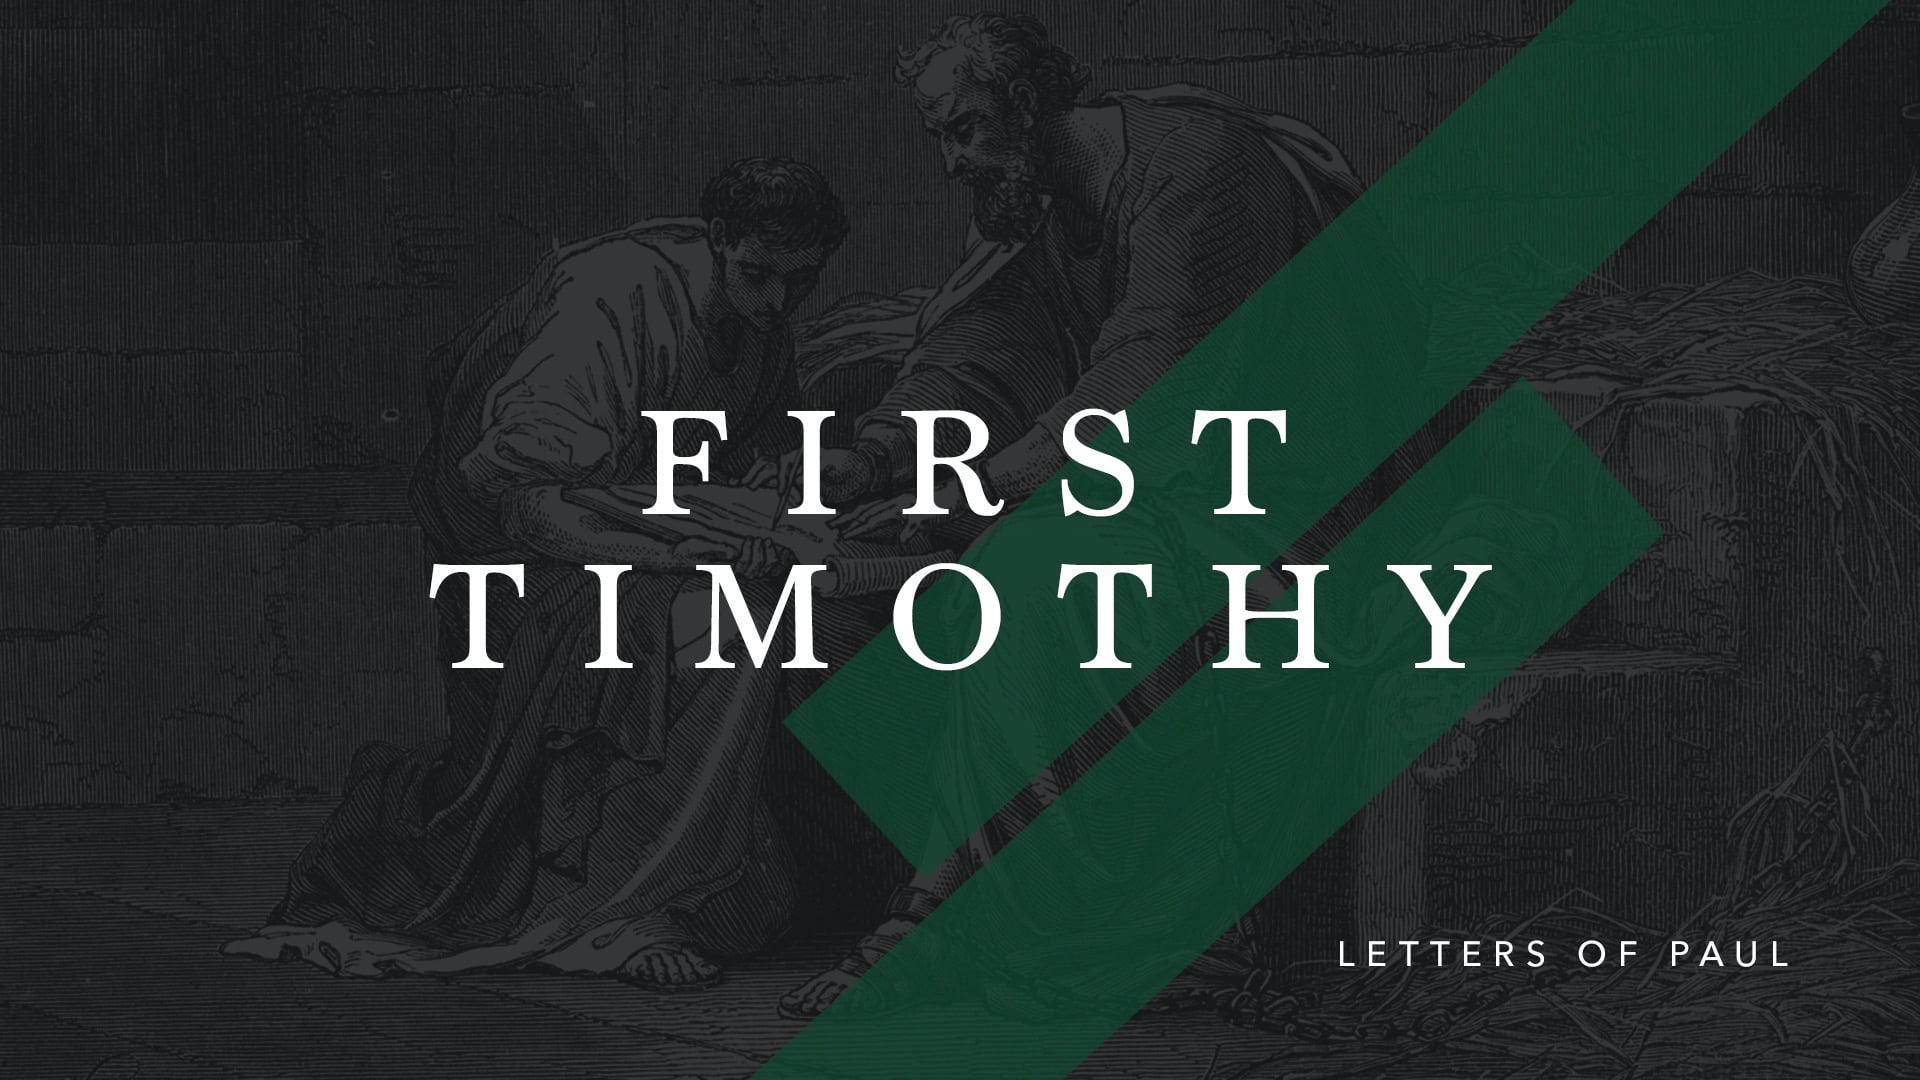 First Timothy: Contentment in All Things